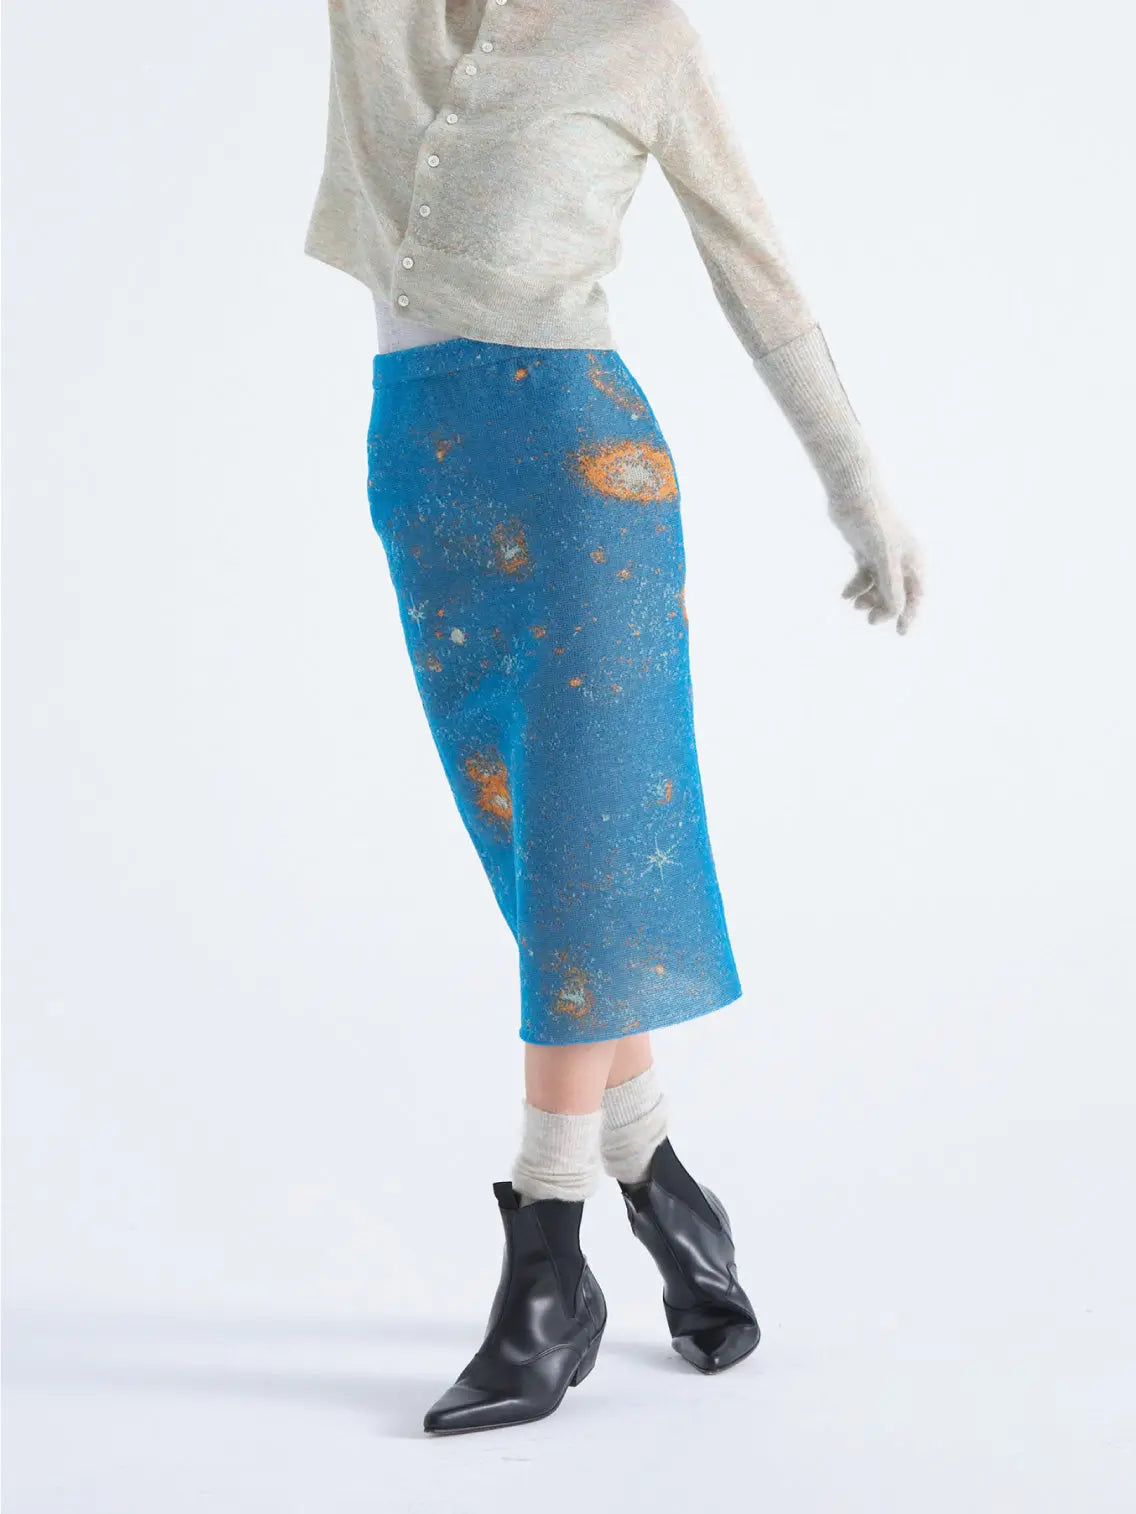 A knee-length blue skirt with an abstract design featuring orange patches and white star-like patterns, creating a visually dynamic galaxy-inspired look. The texture appears fuzzy, giving it a cozy and unique feel. The Galaxy Skirt Blue by Bielo is available at BassalStore in Barcelona for those seeking distinctive style.